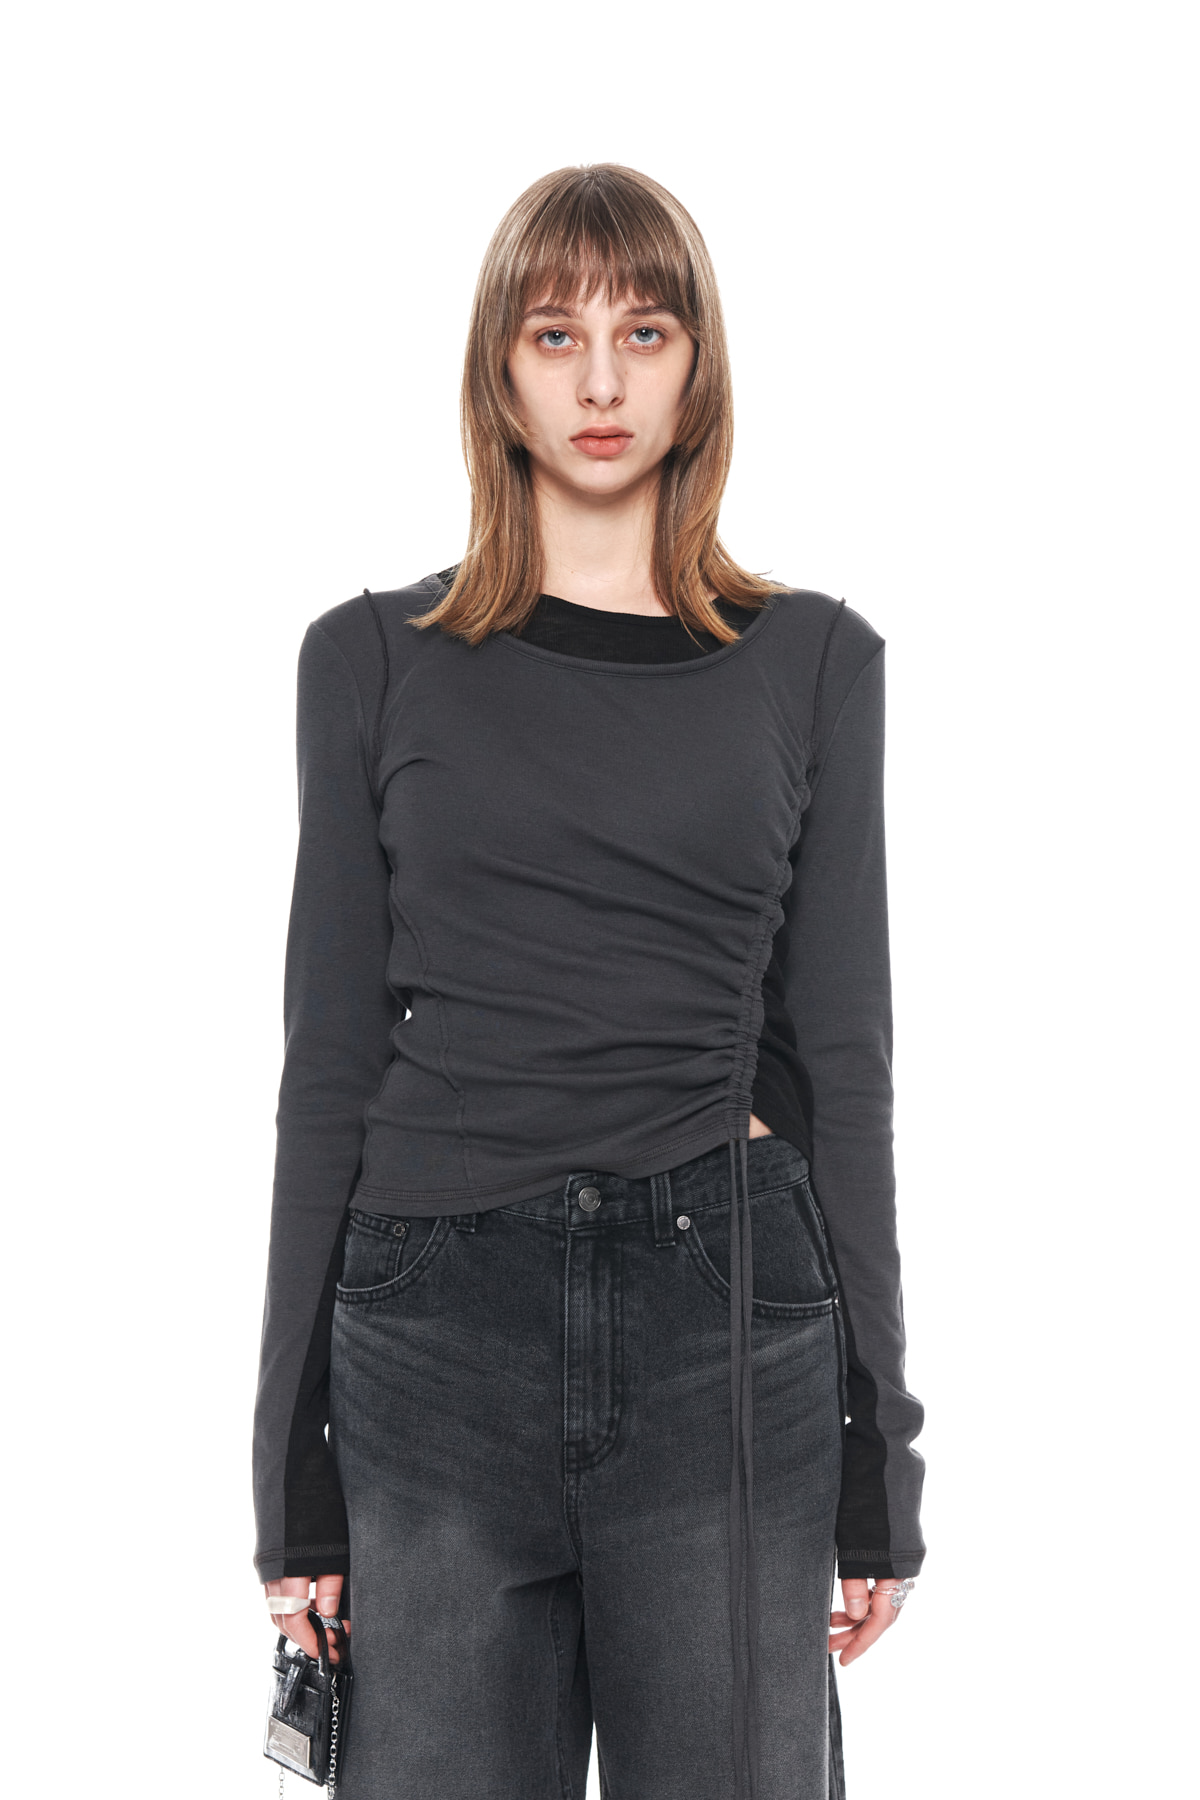 COLOR POINT STRING SLIM TOP IN CHARCOAL